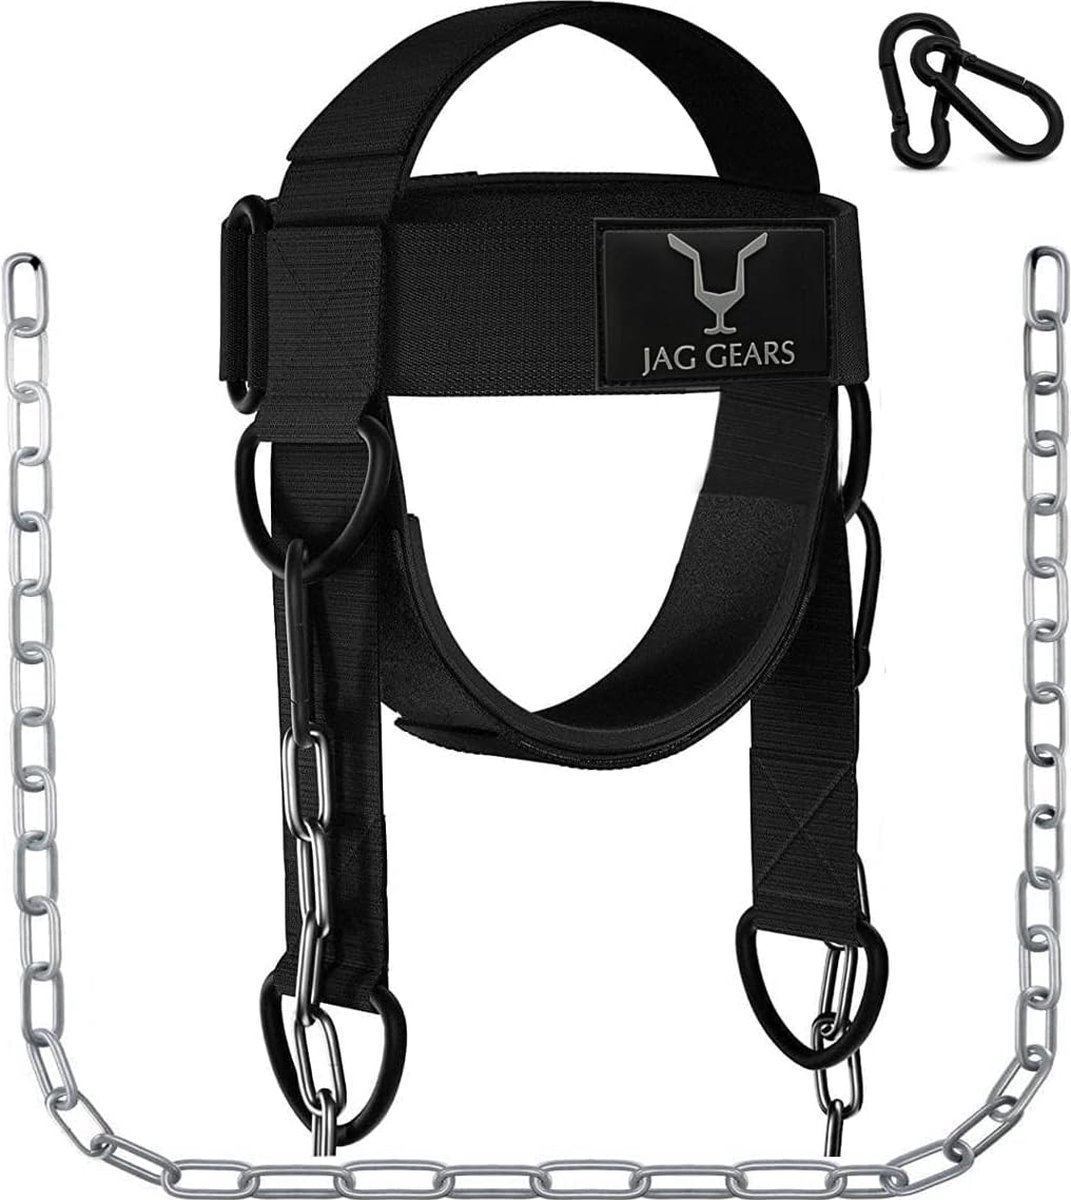 JAG GEARS Neck Trainer Neck Training - Neck Trainer 7 mm Neoprene Padded with 110 cm Long Adjustable Steel Chain for Gym, Racing, Boxing, Neck Training Harness to Improve Muscle Strength